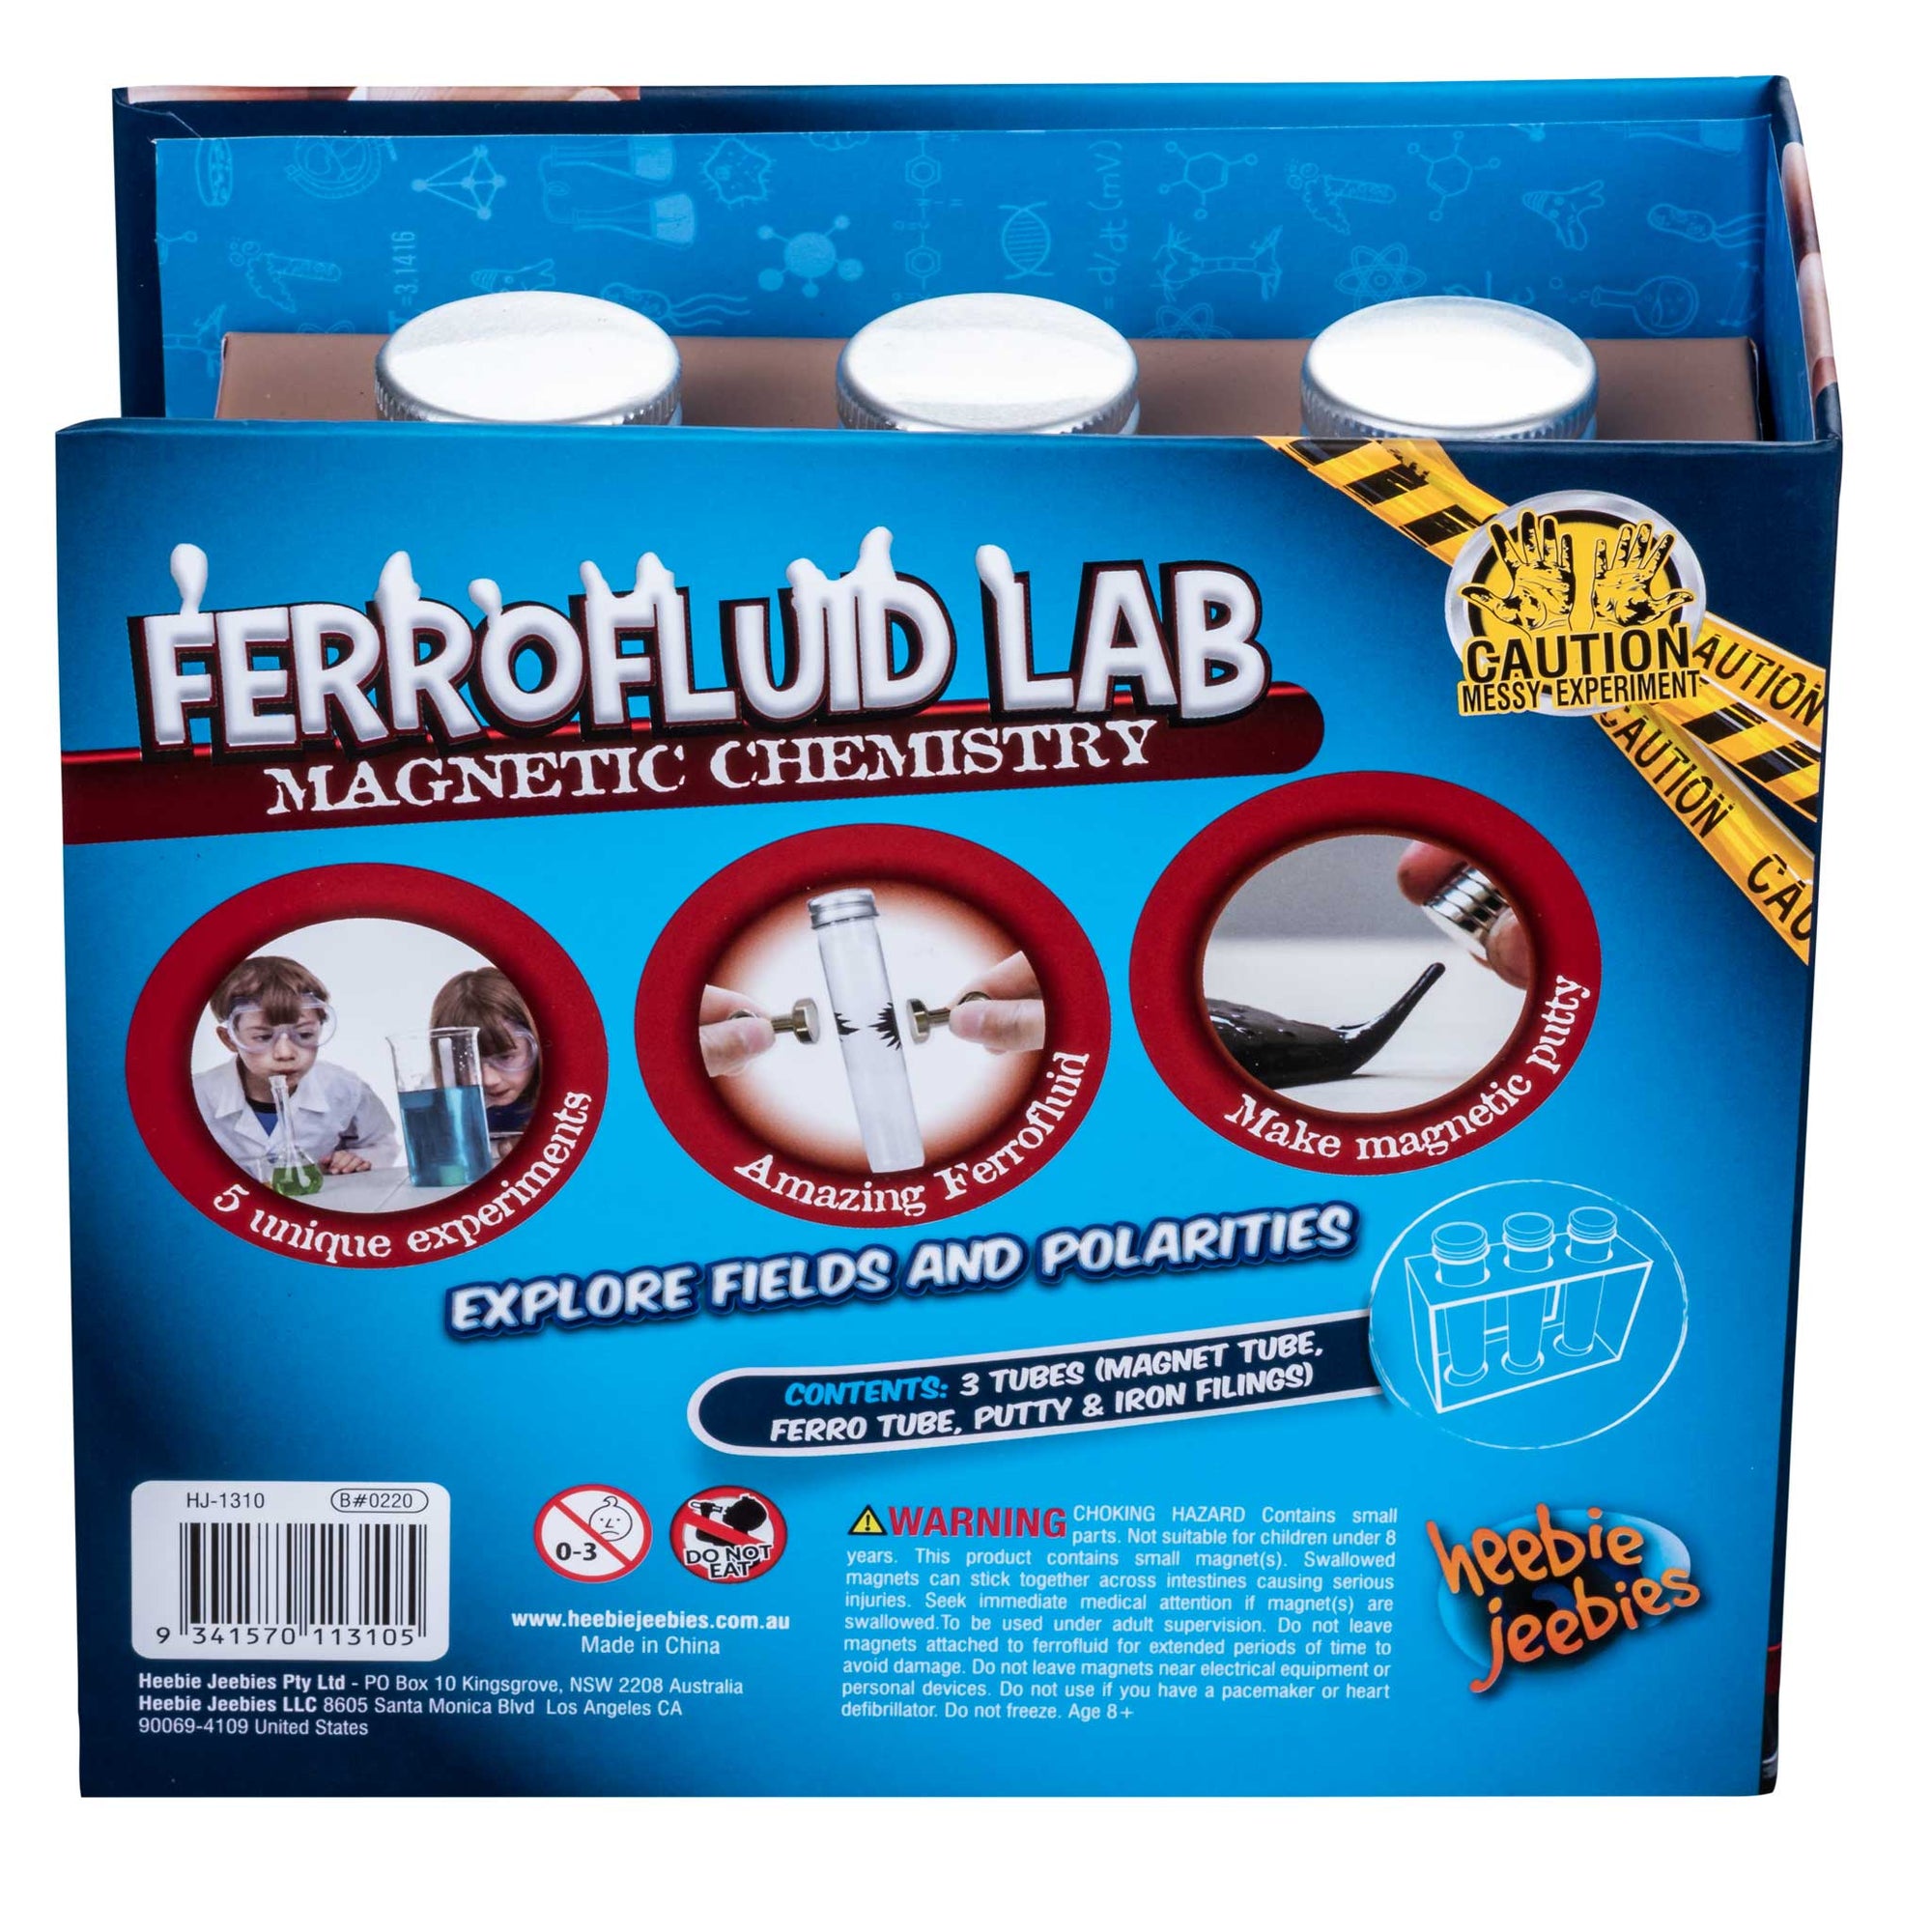 Front view of the ferrofluid lab in the packaging.